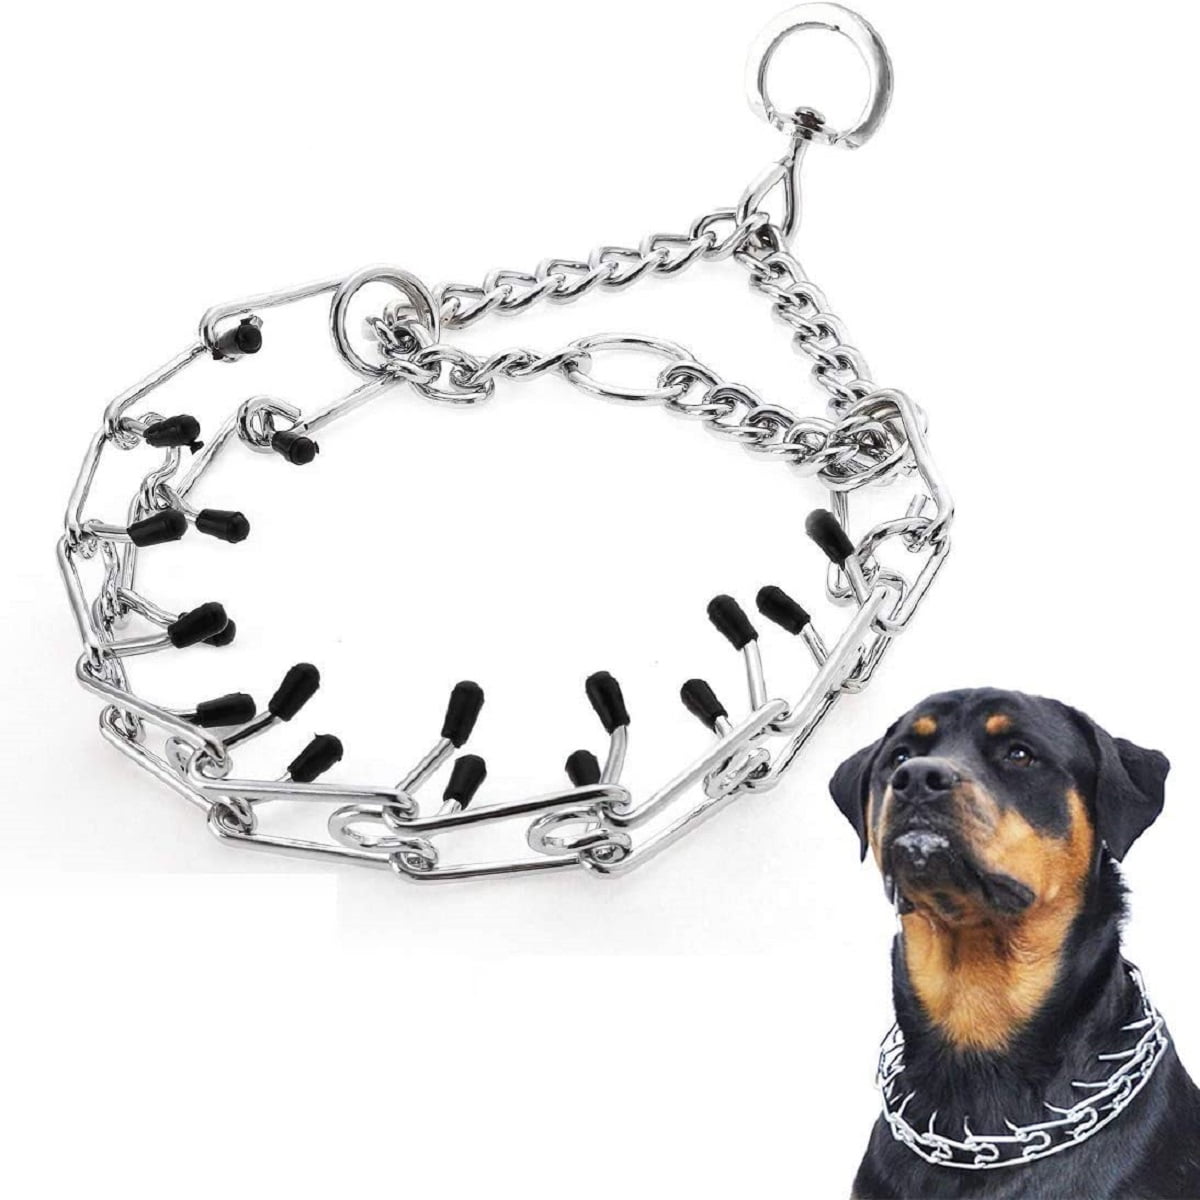 S Ultra-Plus Chrome Plated Training Collar with Quick Release Clip for Dogs Adjustable Pet Pinch Collar with Silver Plating for Small Medium Large Dogs Dog Prong Collar 